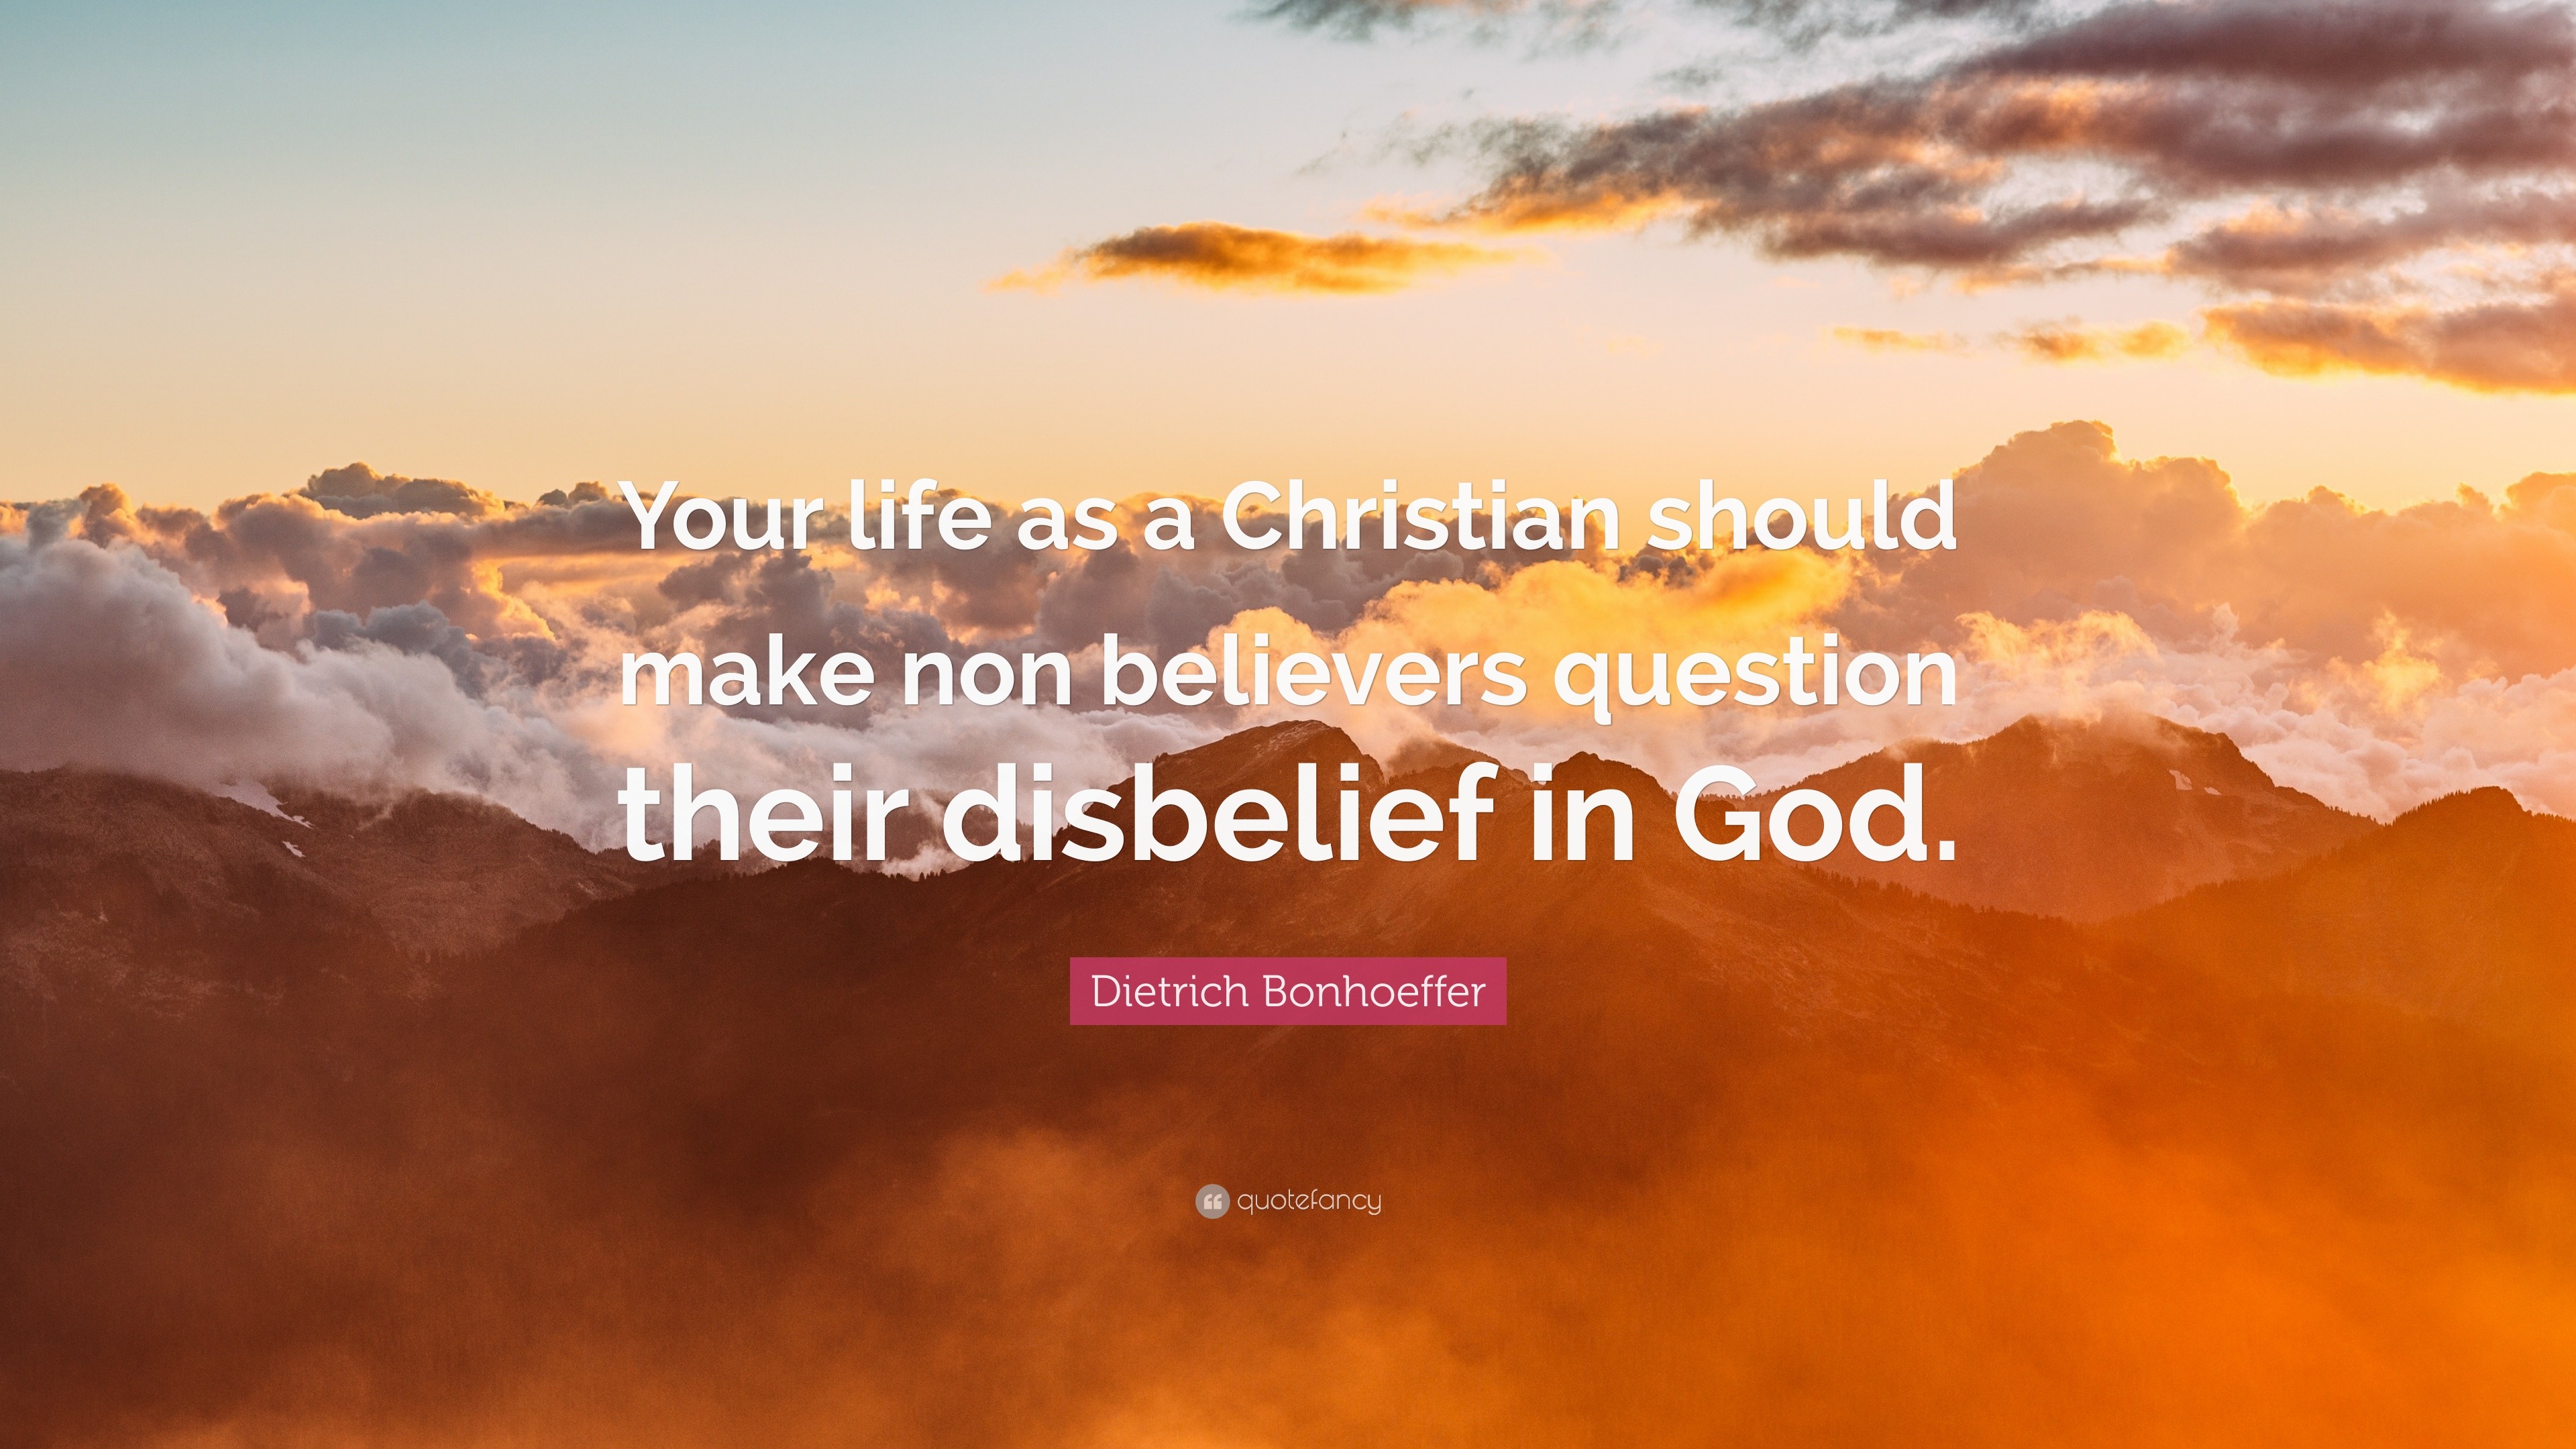 Dietrich Bonhoeffer Quote Your Life As A Christian Should Make Non Believers Question Their Disbelief In